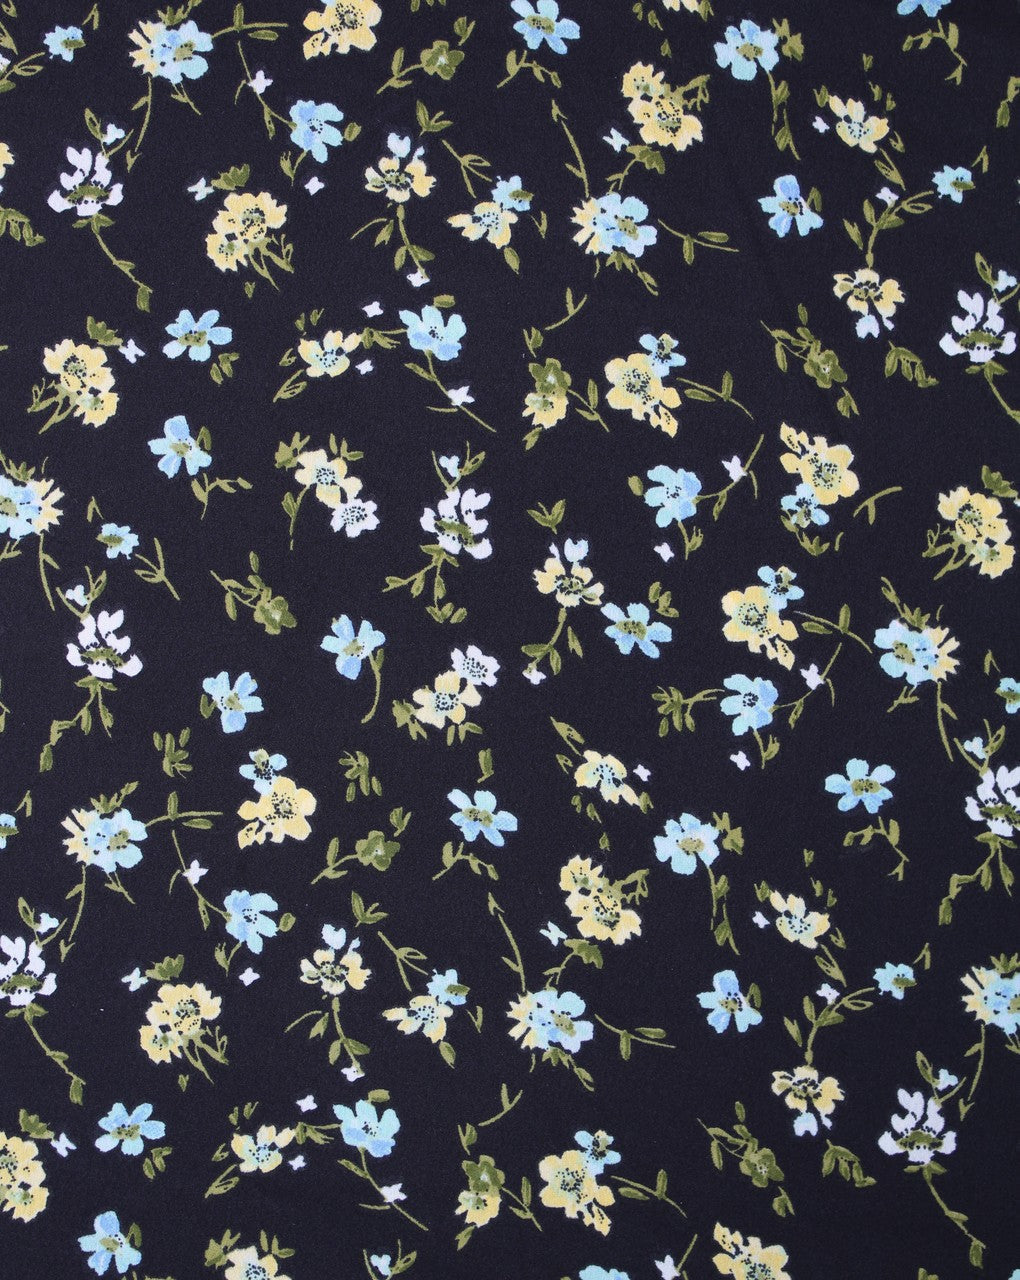 Black And Multicolor Floral Design 2 Polyester Crepe Fabric